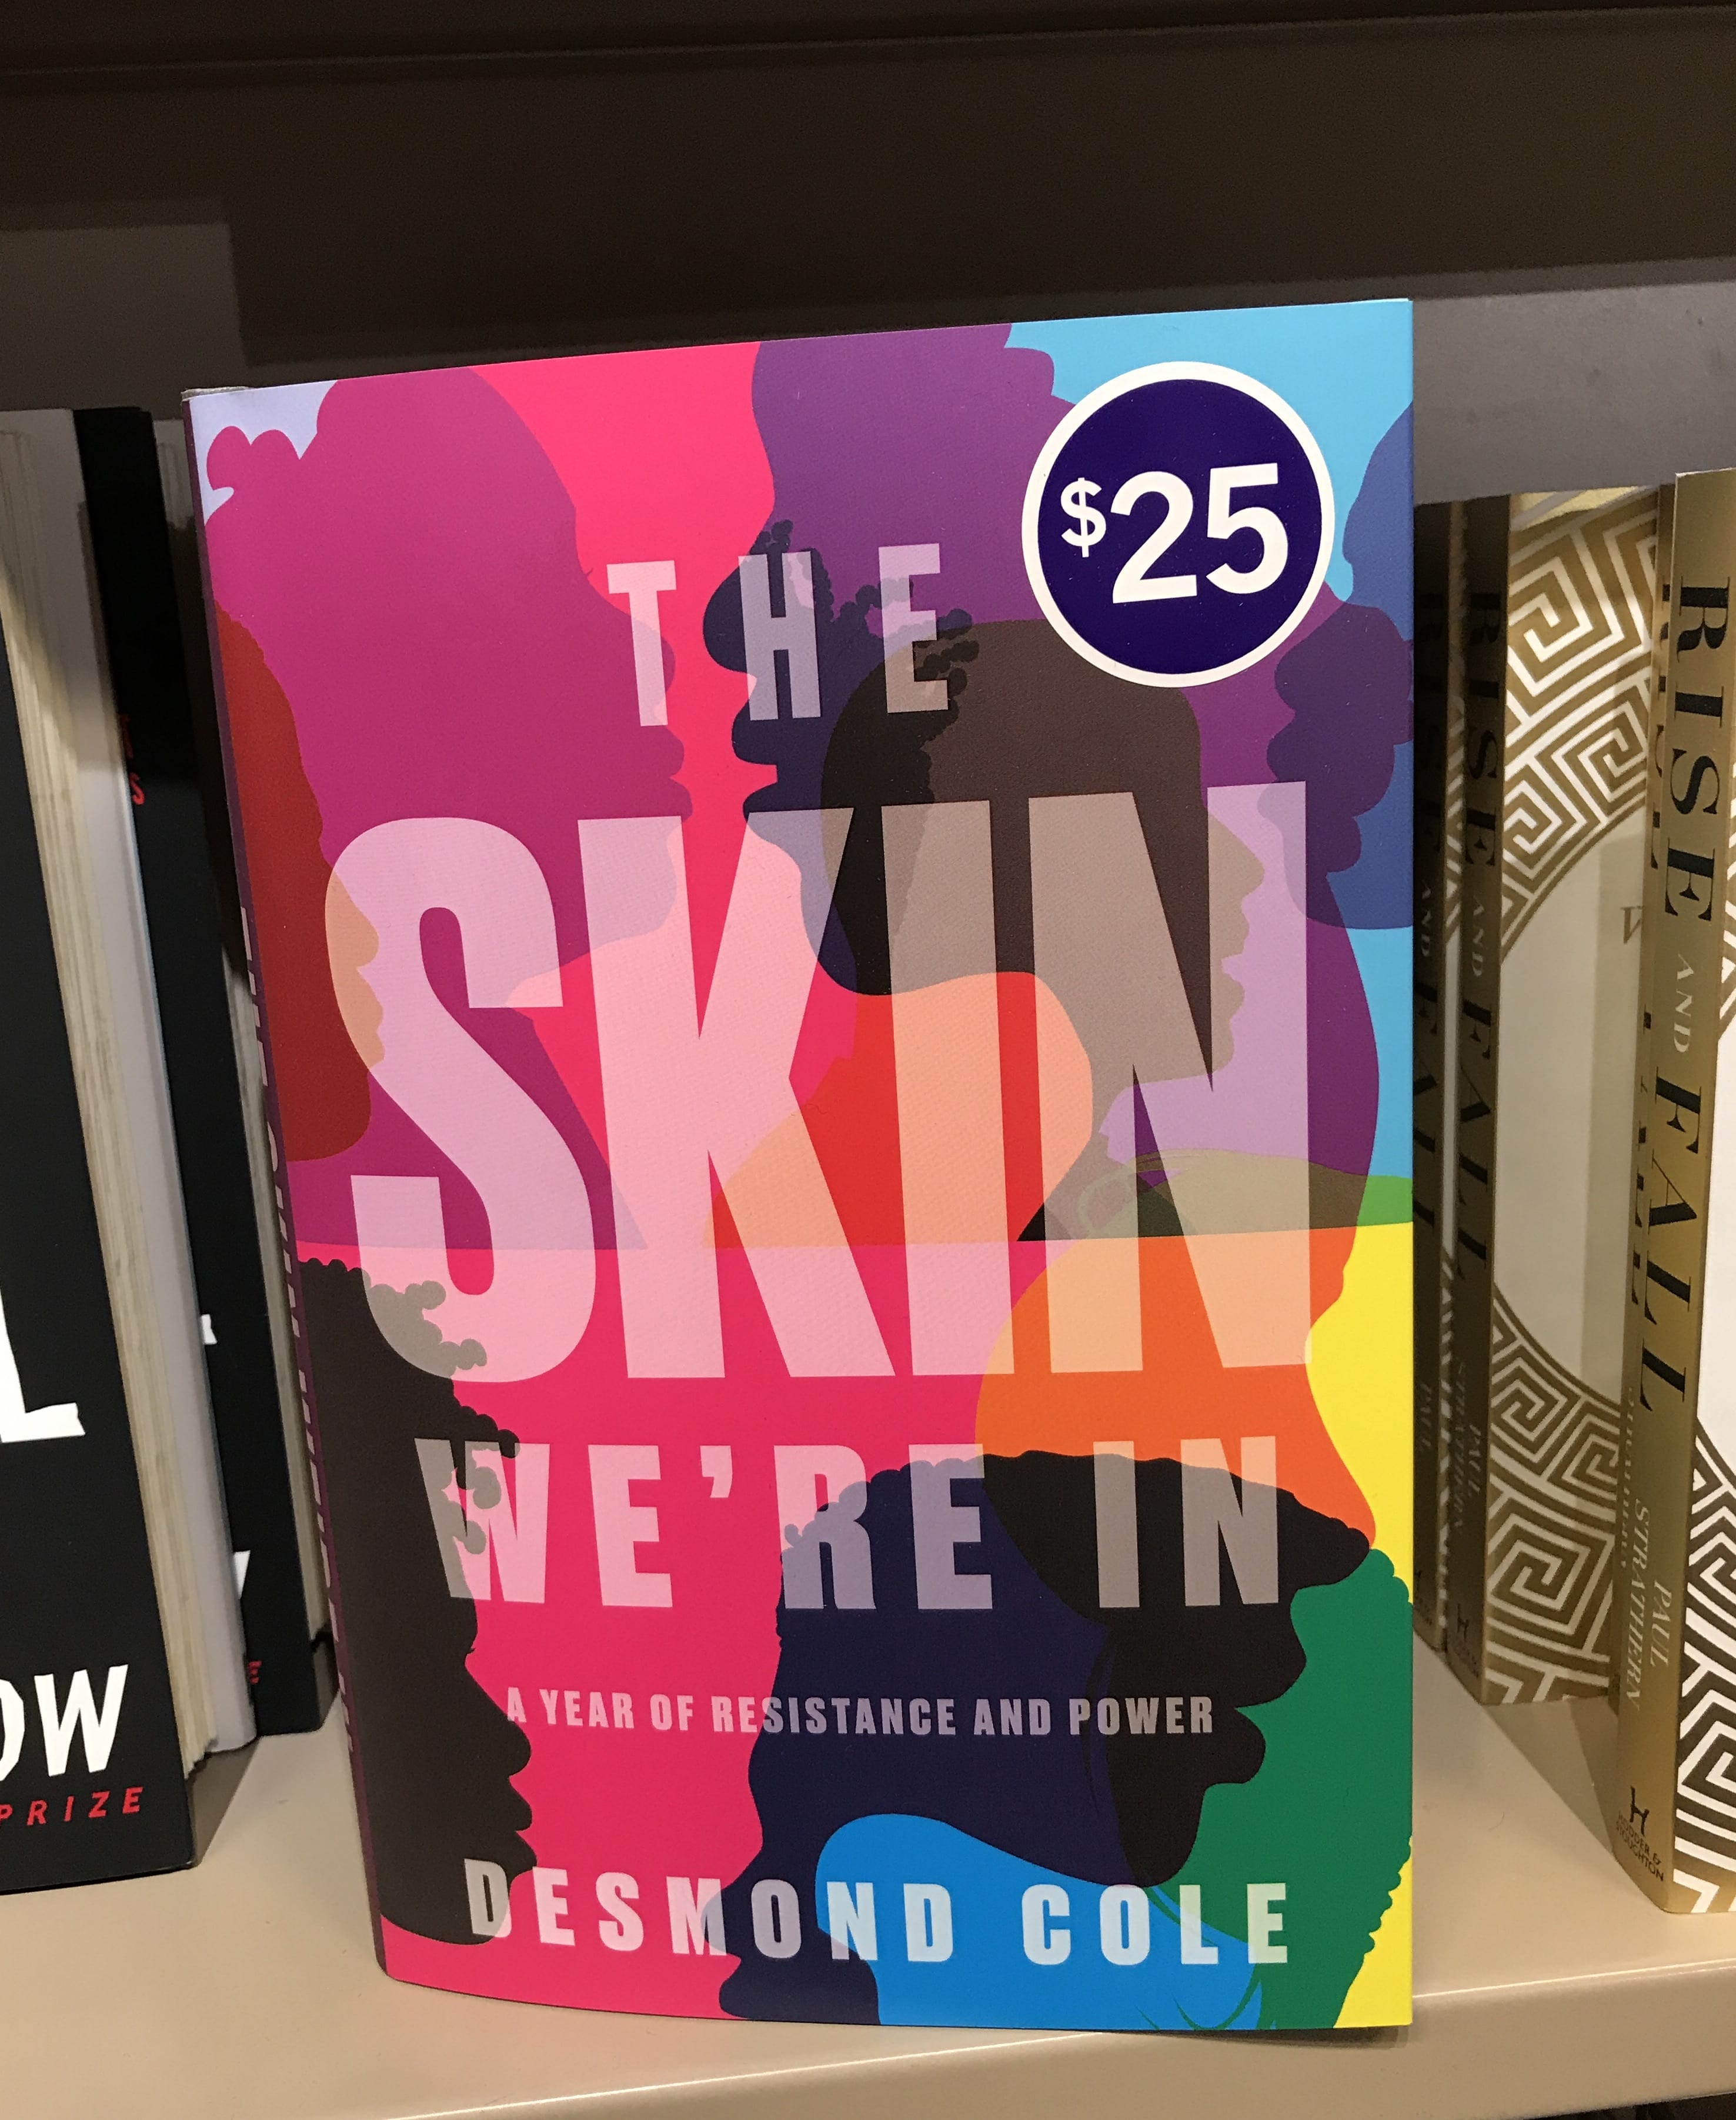 The hardcover of The Skin We're In is seen on the shelf at Indigo